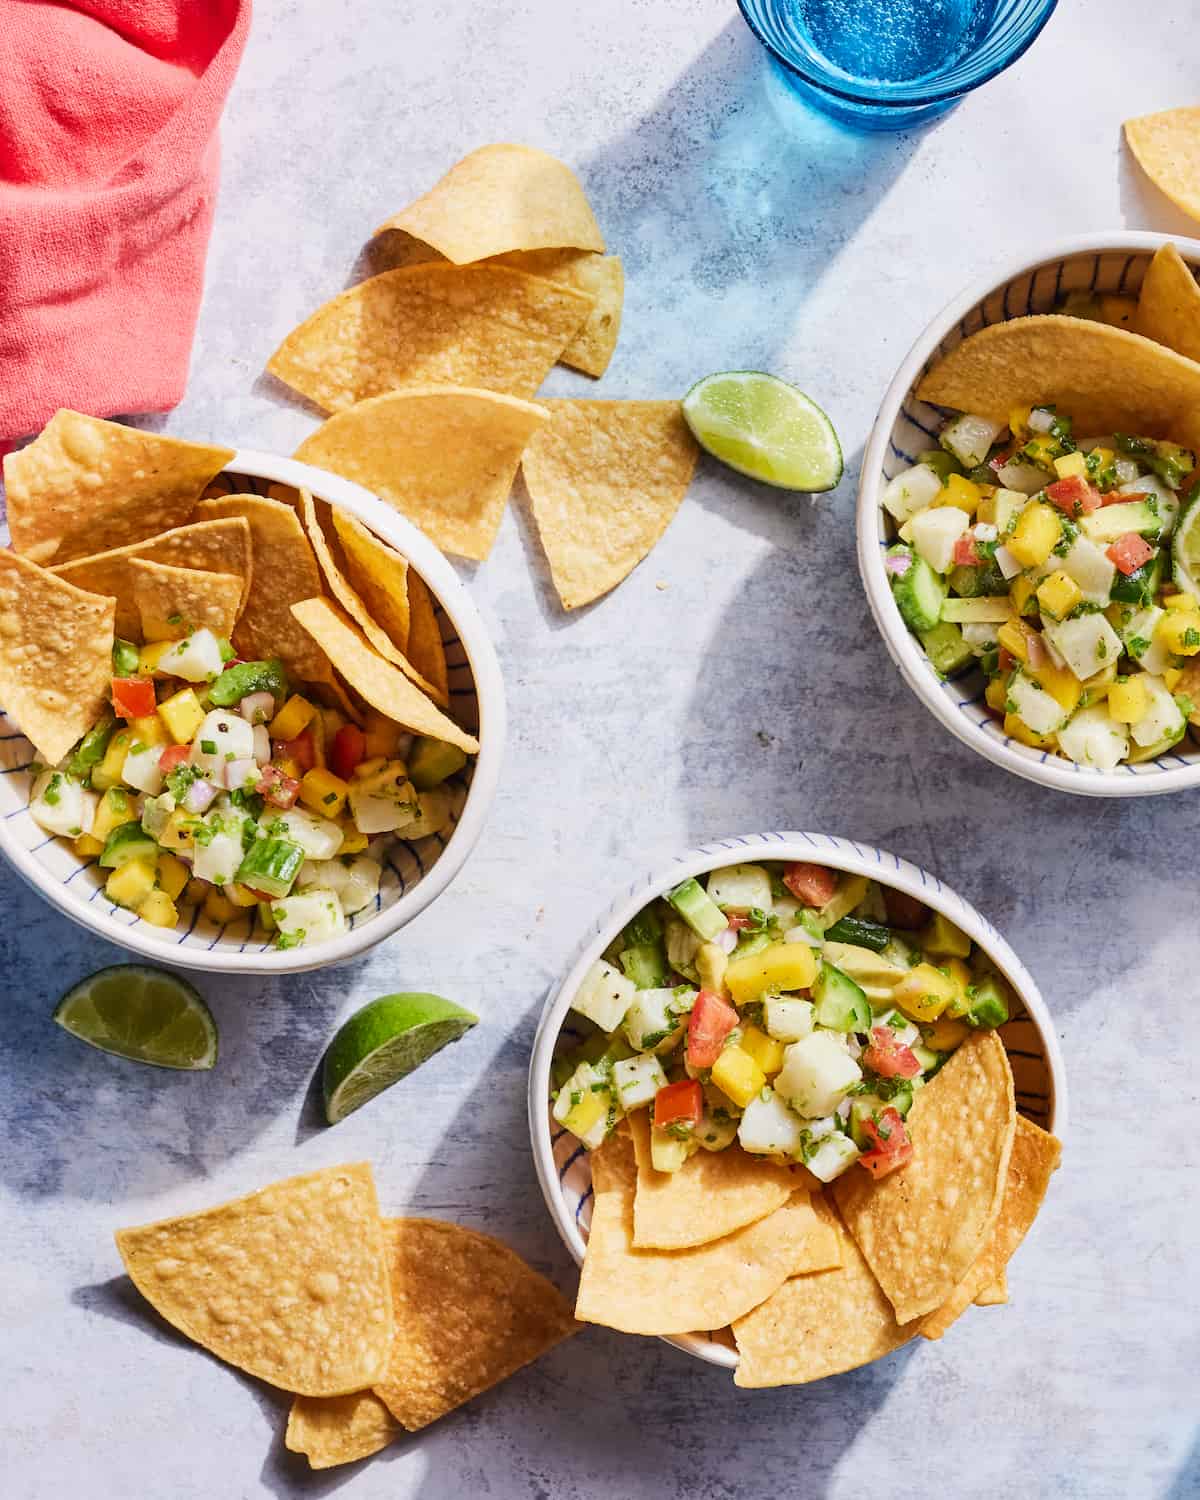 Three ceramic bowls filled with Sea Bass Ceviche and tortilla chips beside tortilla chips, lime wedges, a pink linen napkin in upper left corner, and a blue glass of water in upper right corner on a countertop.